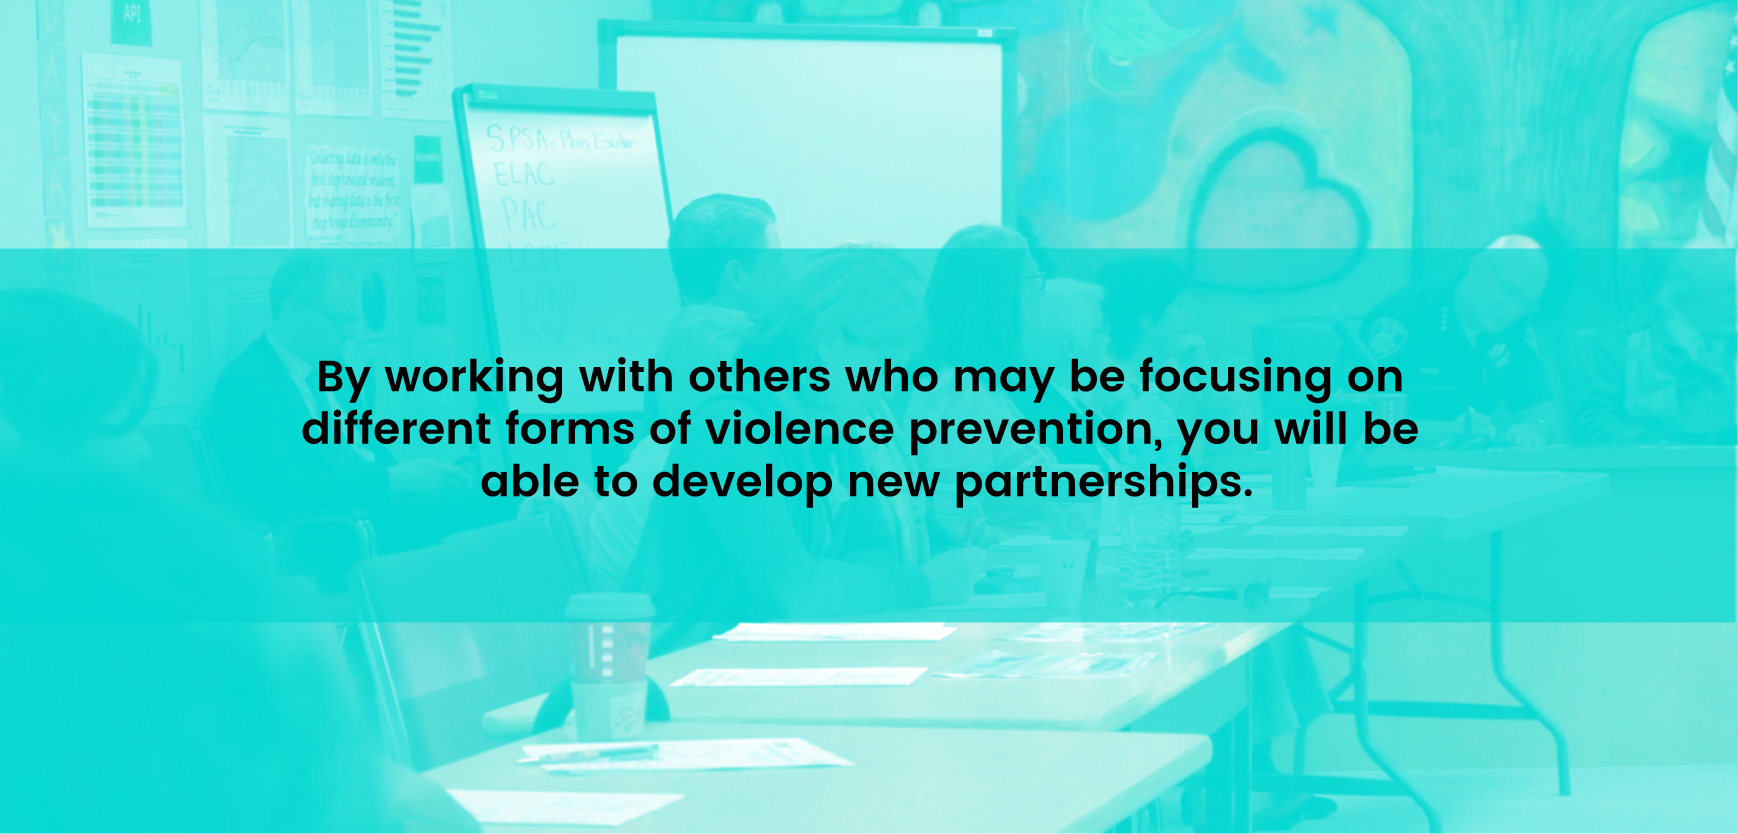 By working with others who may be focusing on different forms of violence prevention, you will be able to develop new partnerships